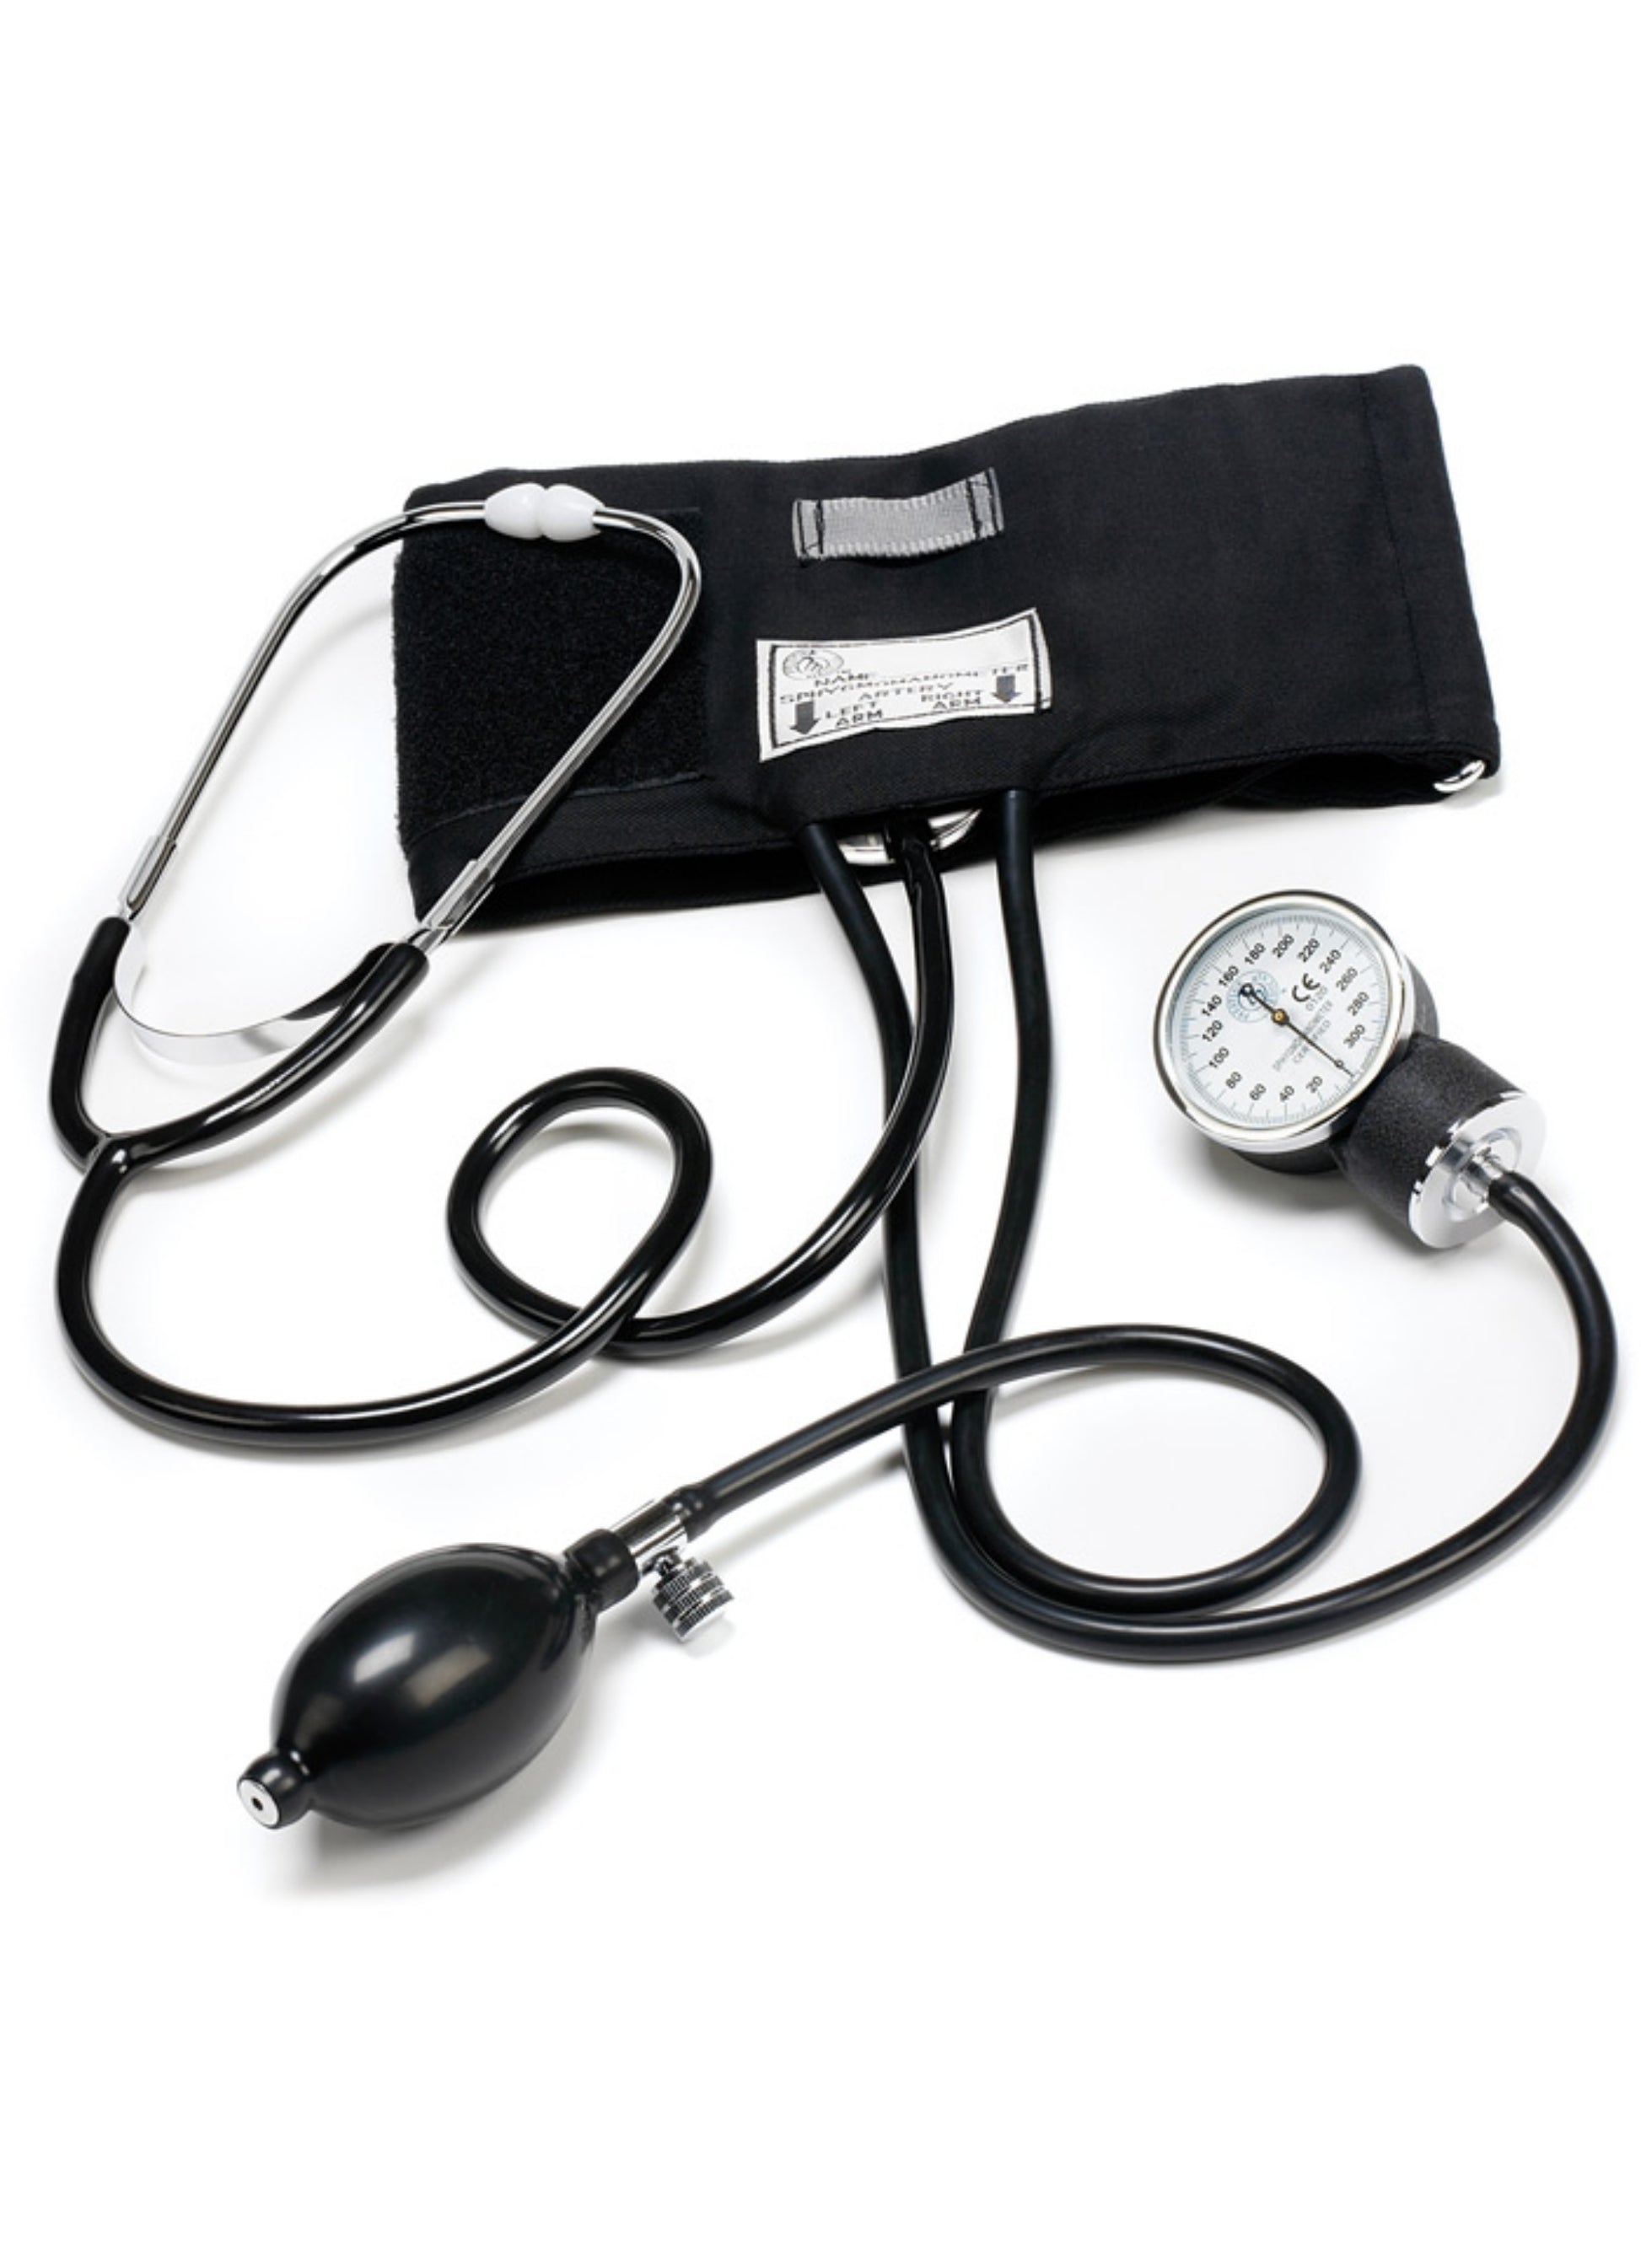  Traditional Home Blood Pressure Set